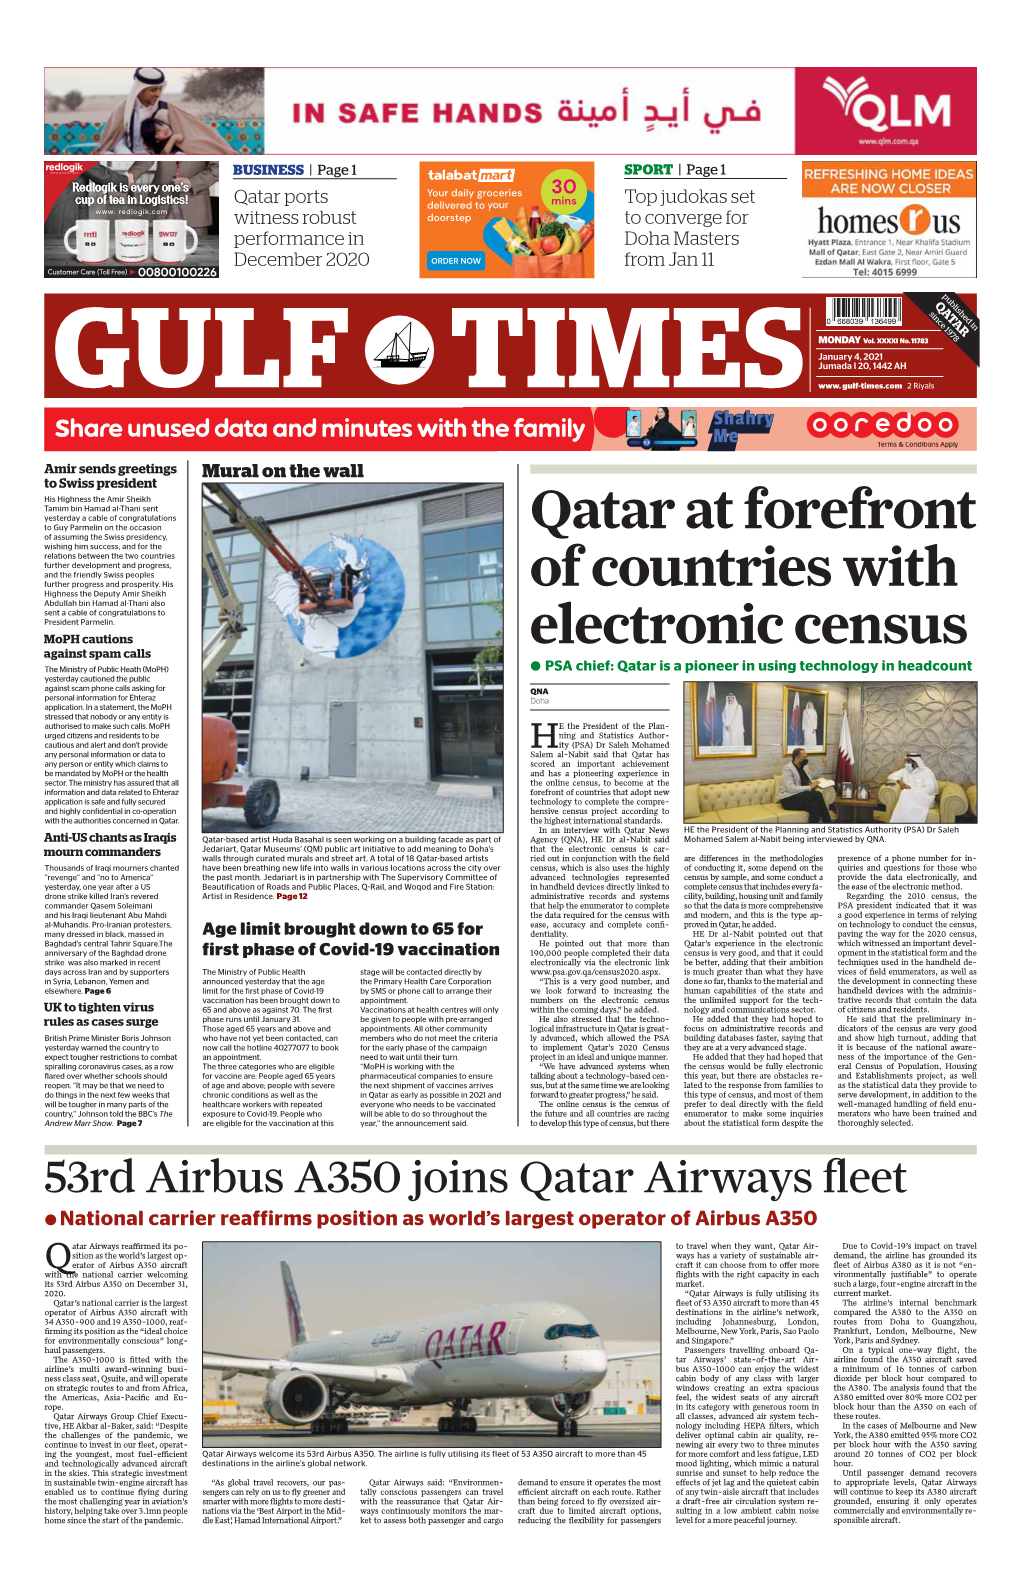 Qatar at Forefront of Countries with Electronic Census